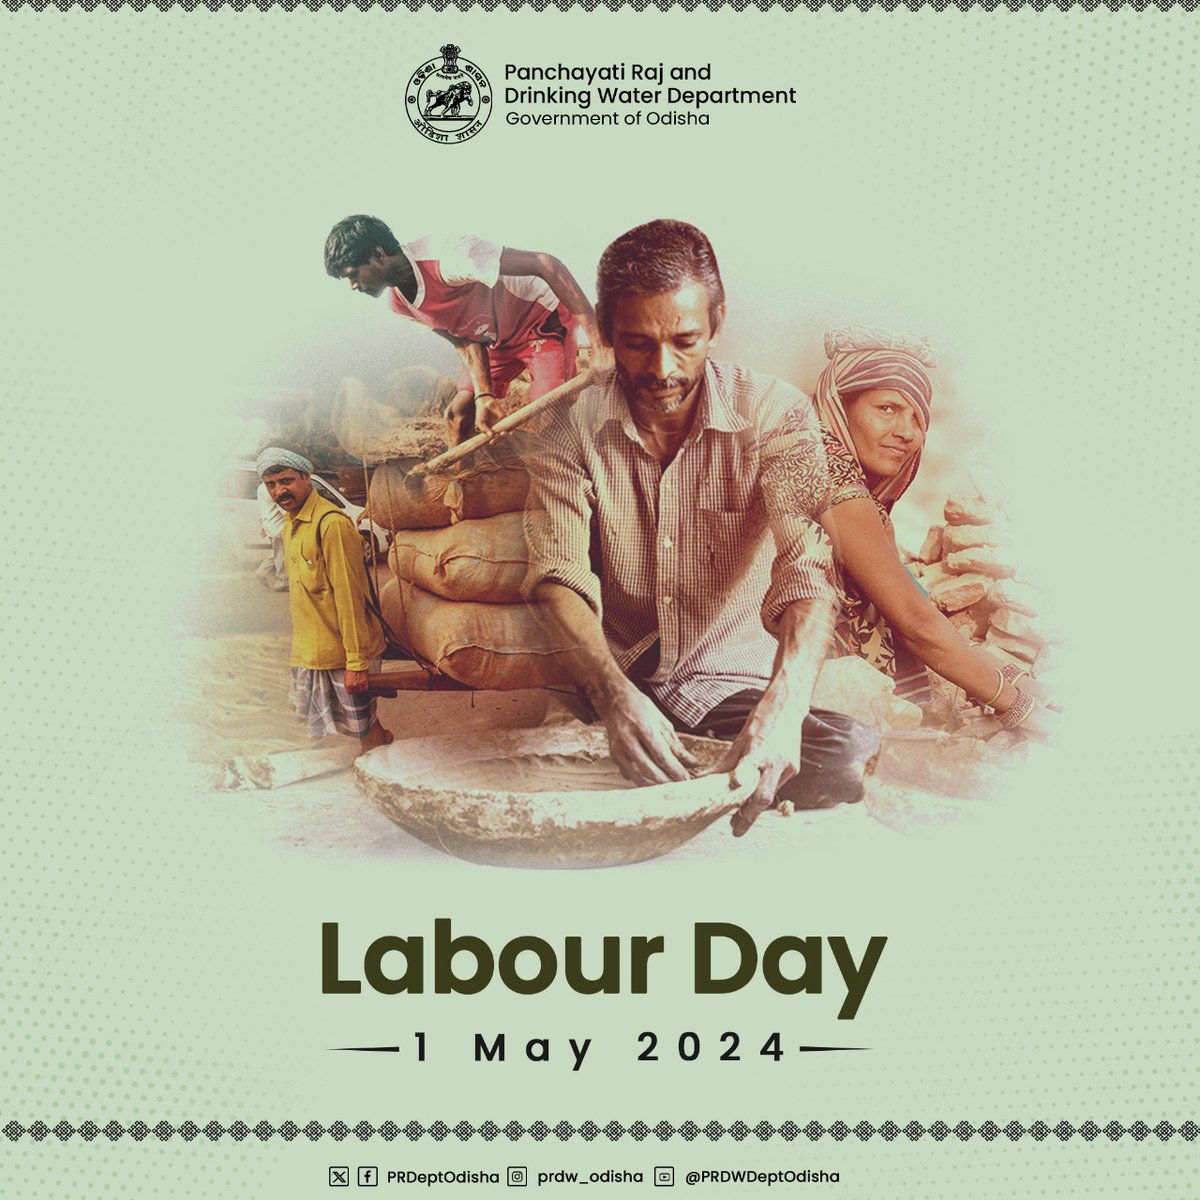 On this #InternationalLabourDay let's honor the unwavering determination and tireless hard work of countless workers who are the backbone of #Odisha as well as Nation’s progress. Let's continue to recognise and appreciate the invaluable contributions of workers everywhere.